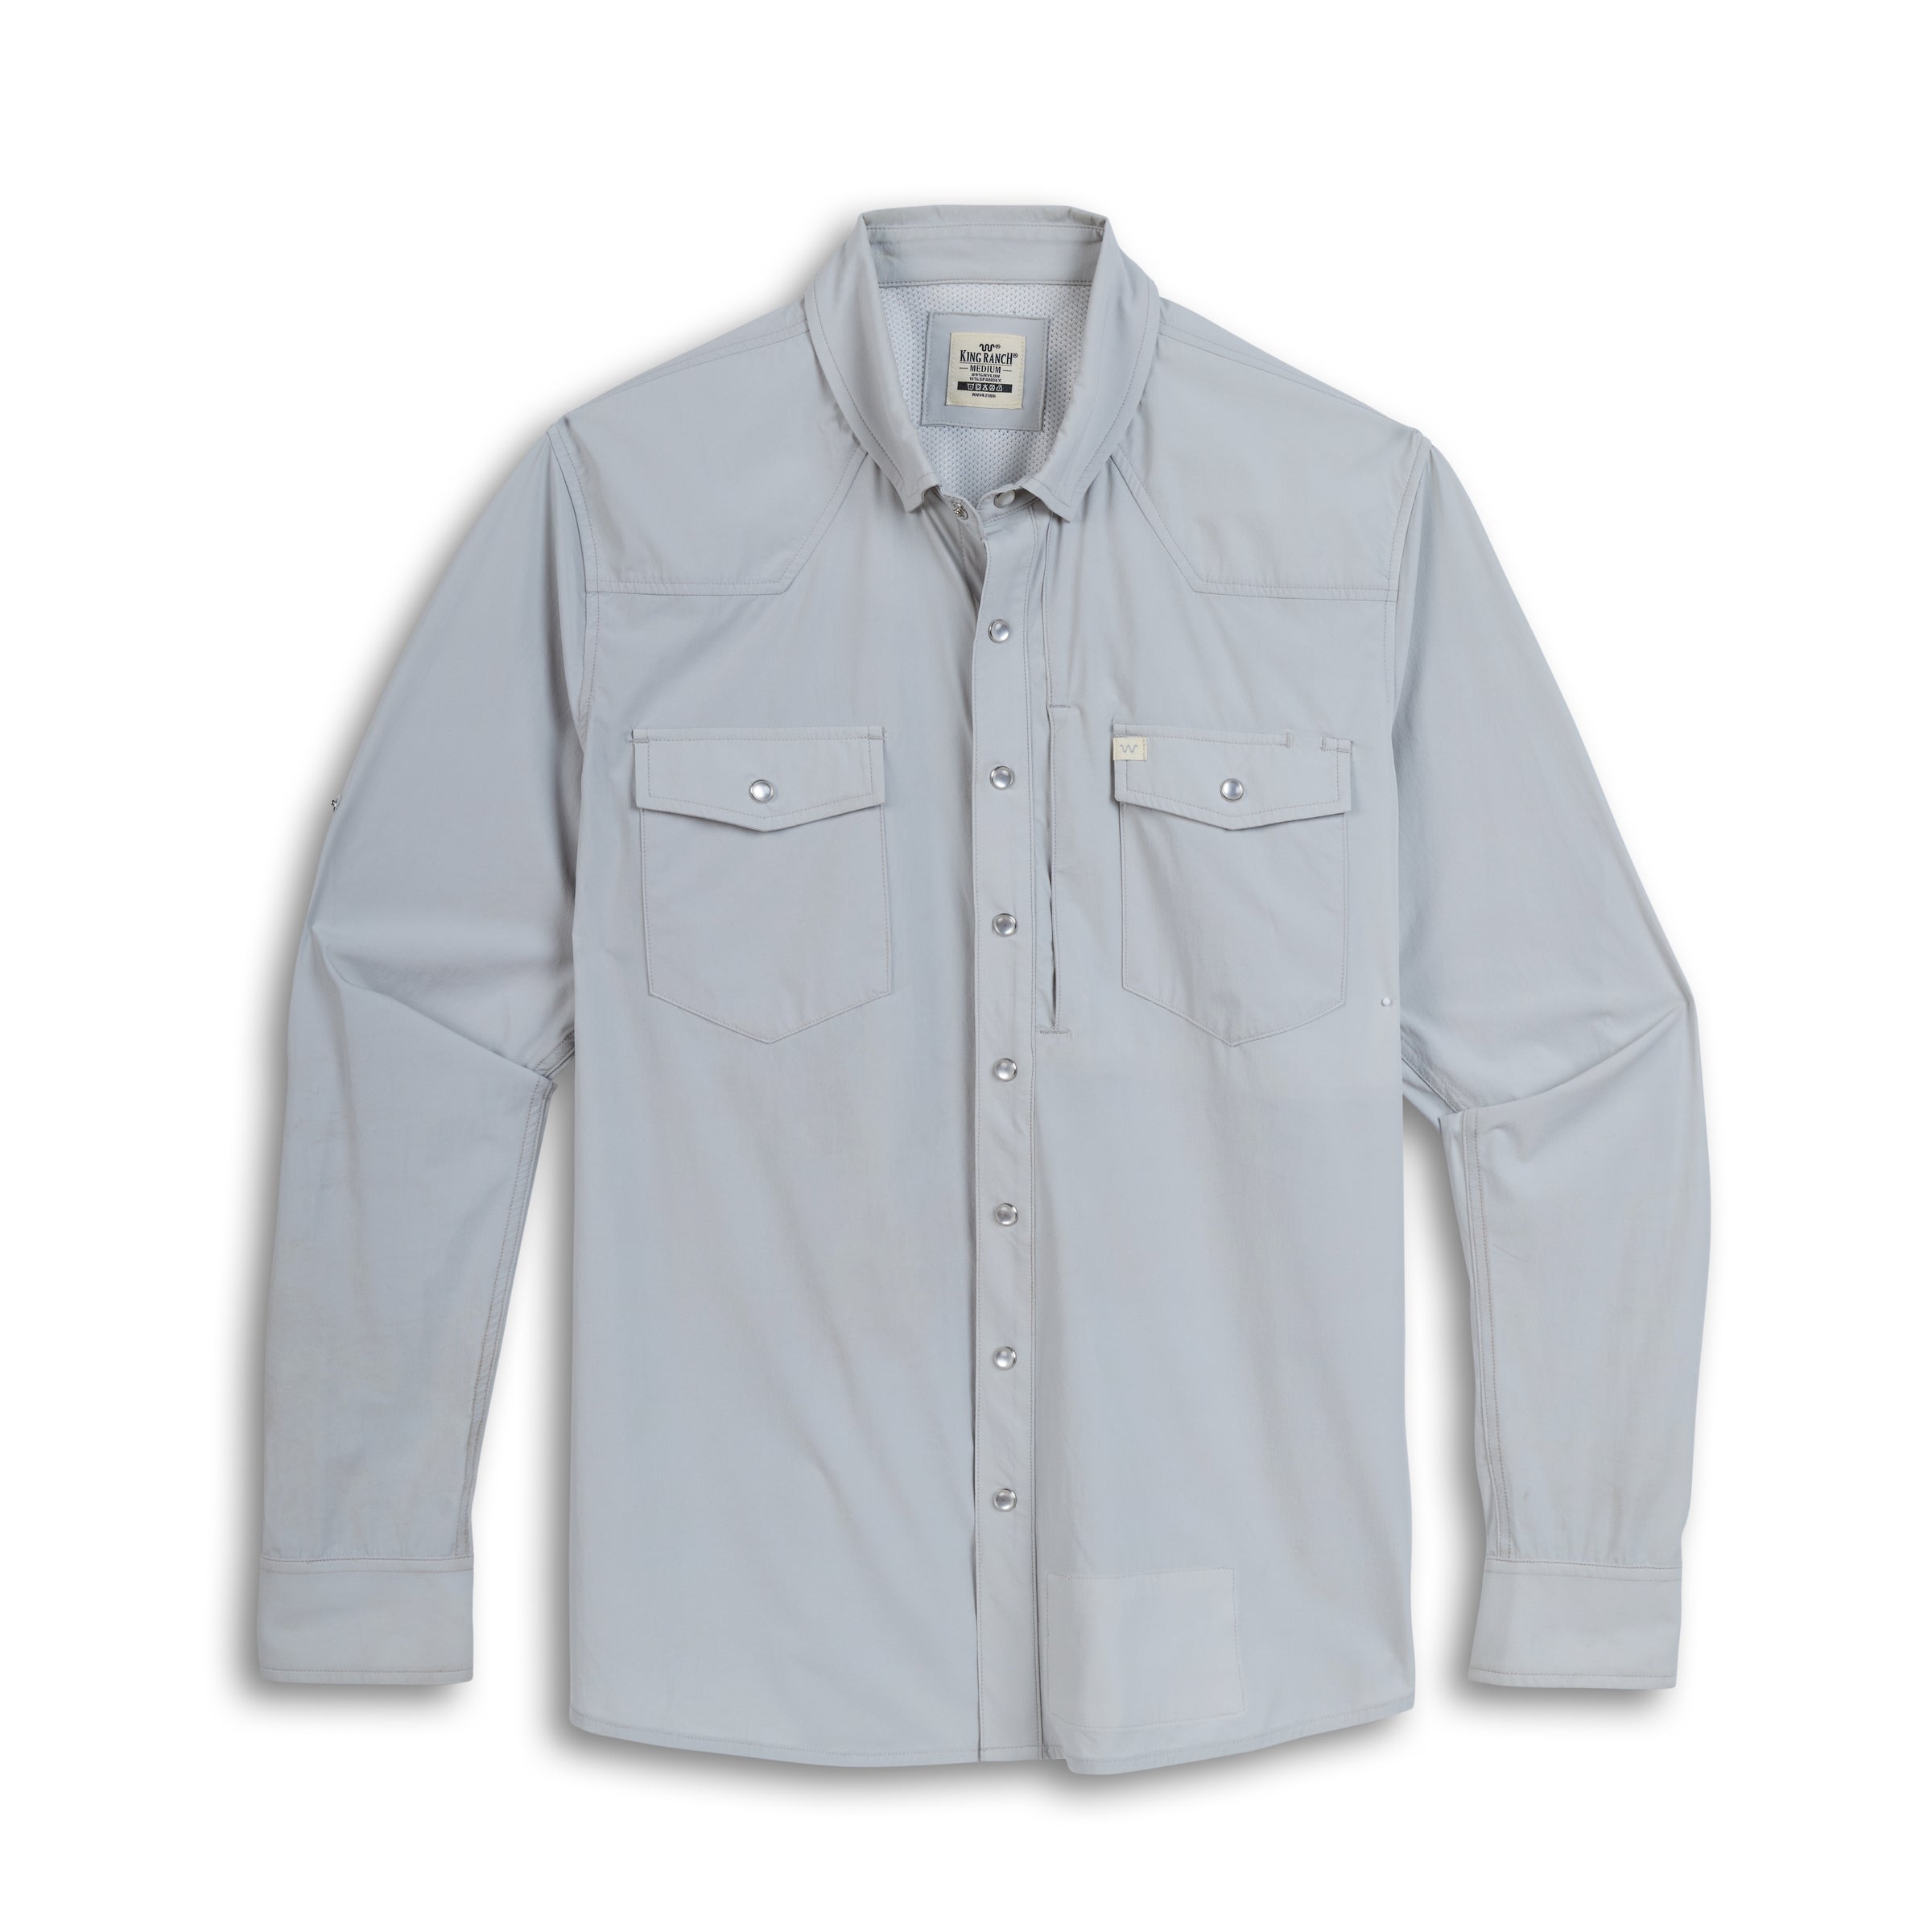 Men's Long Sleeves Ultimate Western Fishing Shirt | Color: Grey | Size: Medium by King Ranch Saddle Shop